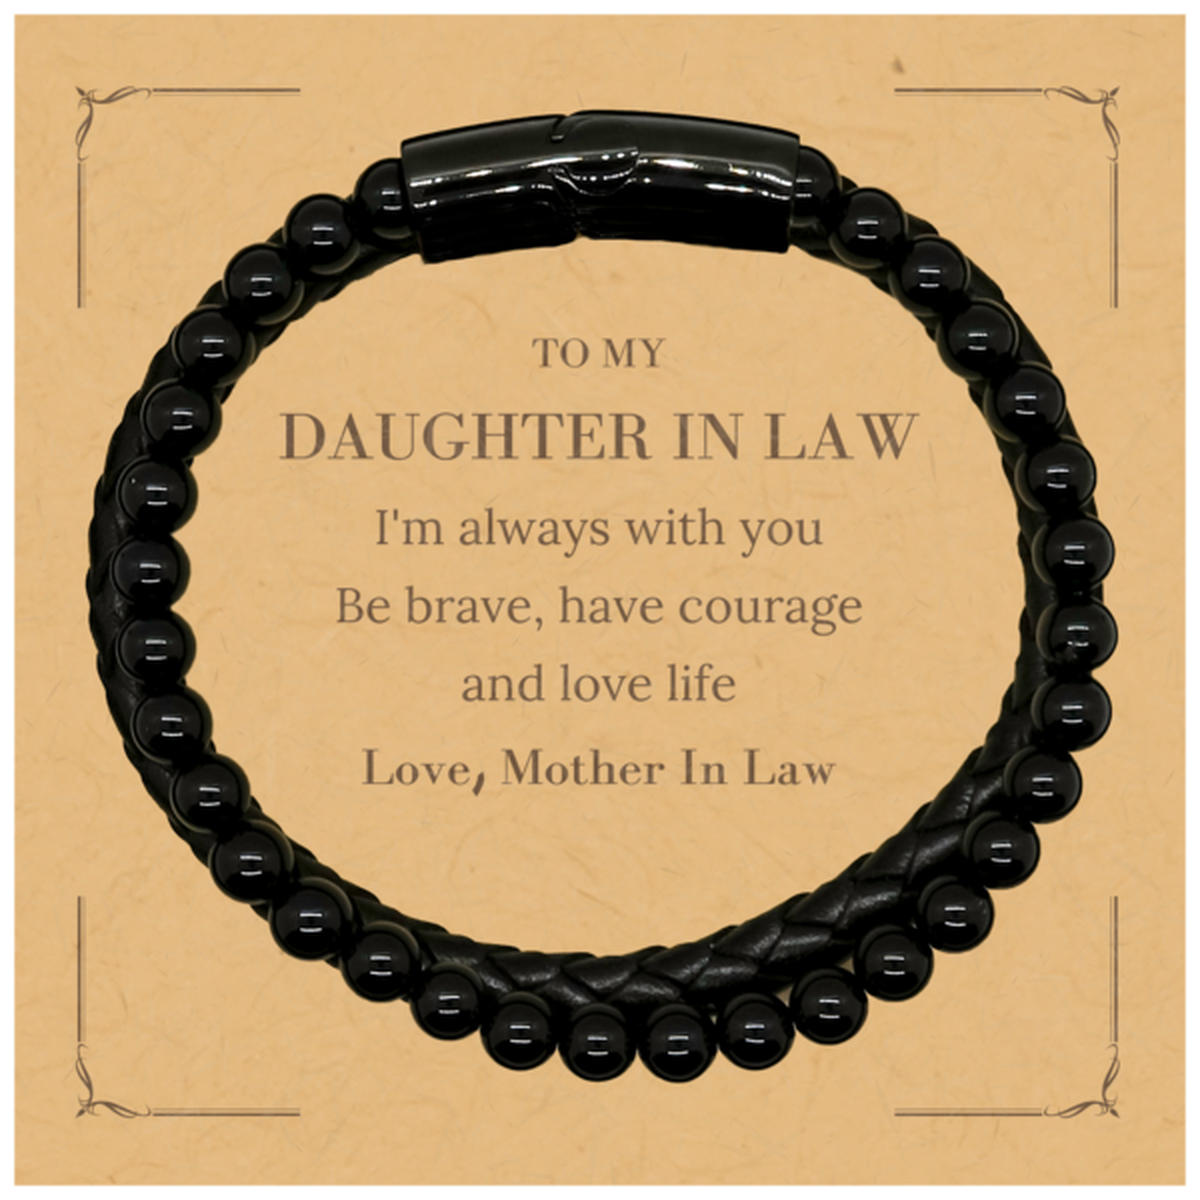 To My Daughter In Law Gifts from Mother In Law, Unique Stone Leather Bracelets Inspirational Christmas Birthday Graduation Gifts for Daughter In Law I'm always with you. Be brave, have courage and love life. Love, Mother In Law